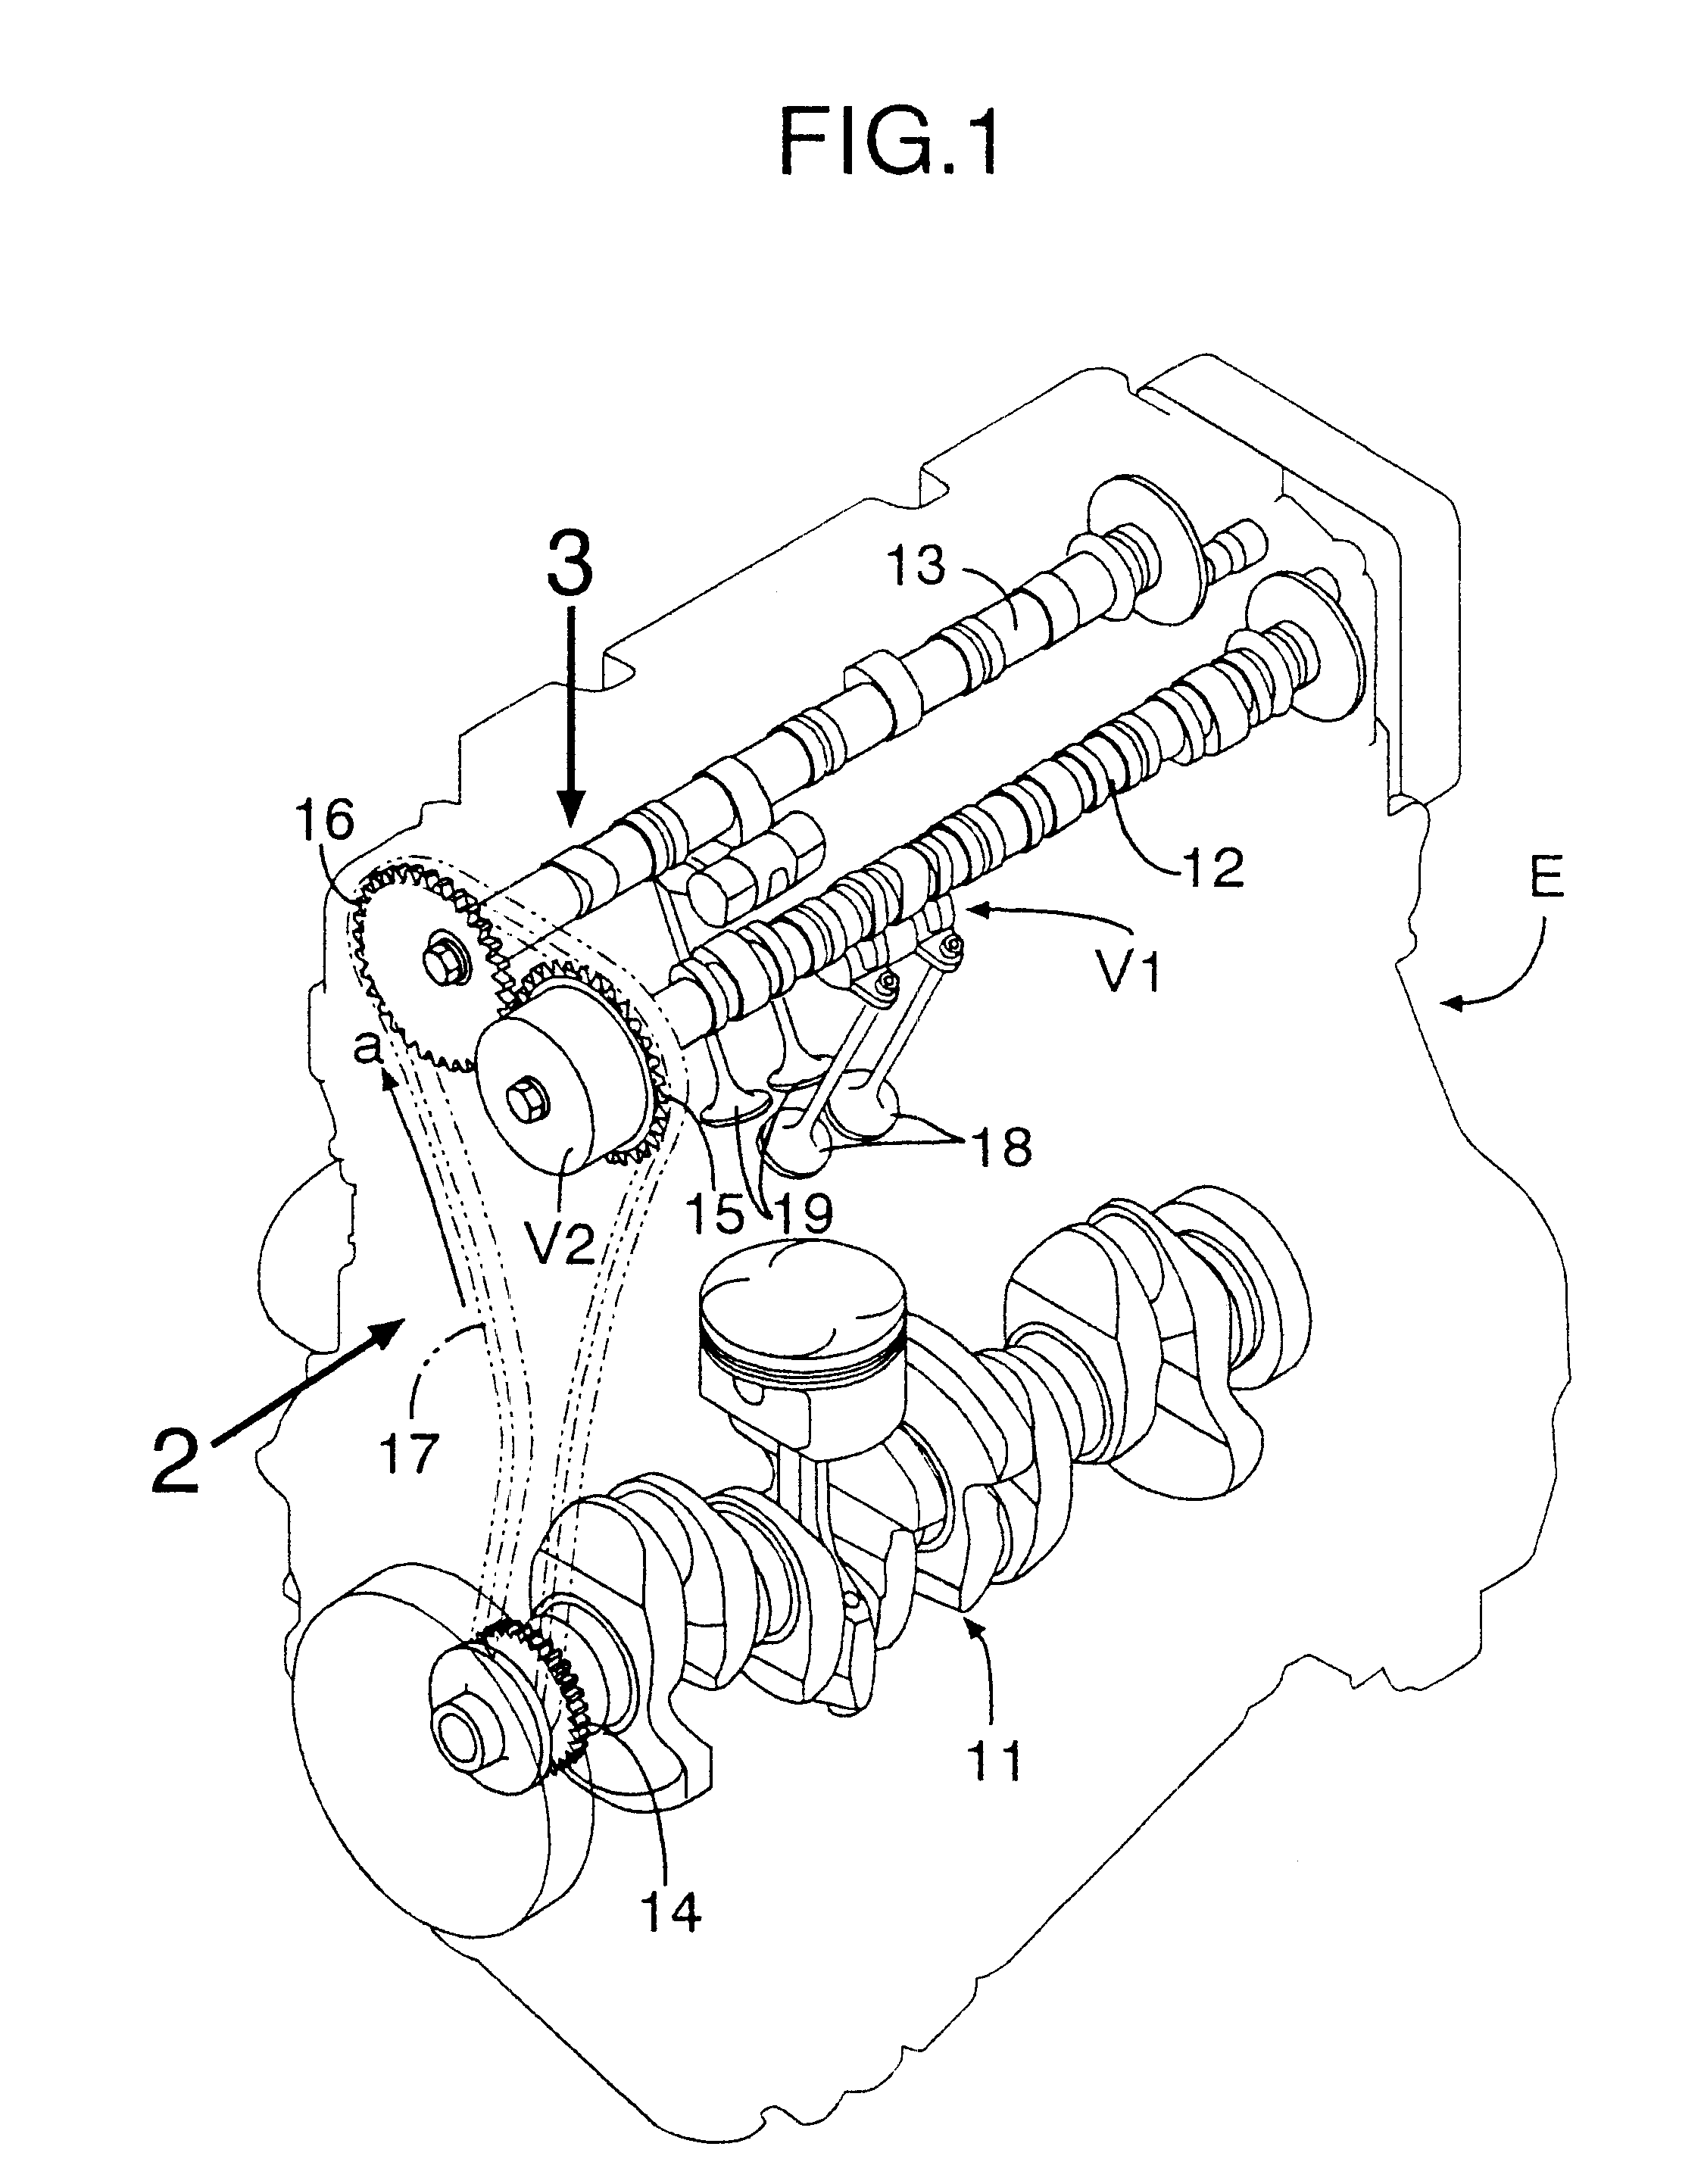 Timing chain lubricating system for engine